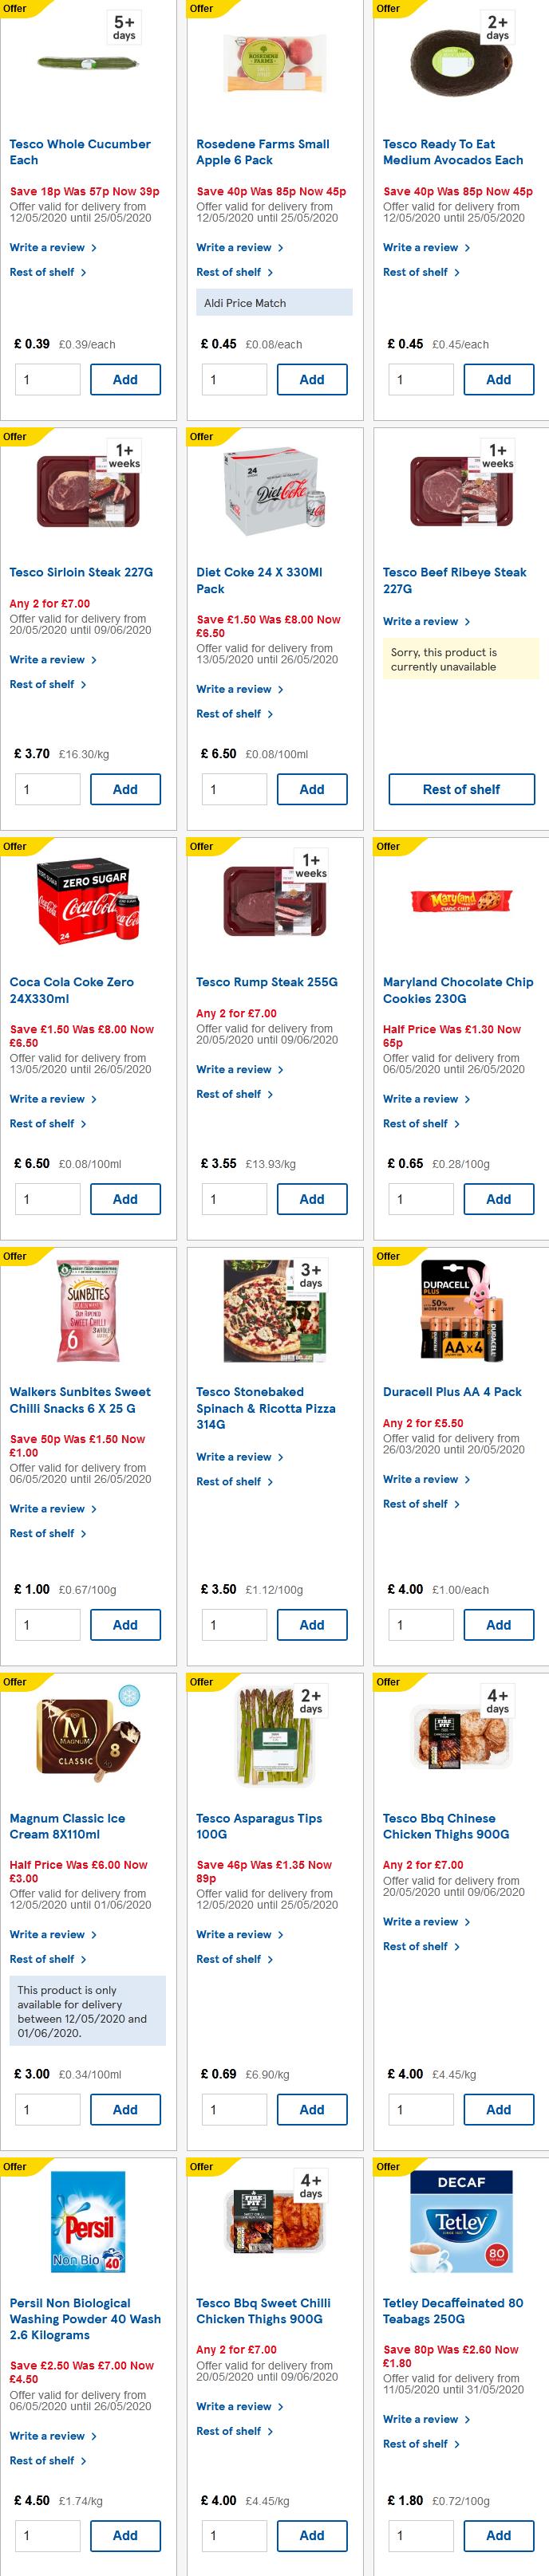 Tesco top offers 19 May 2020